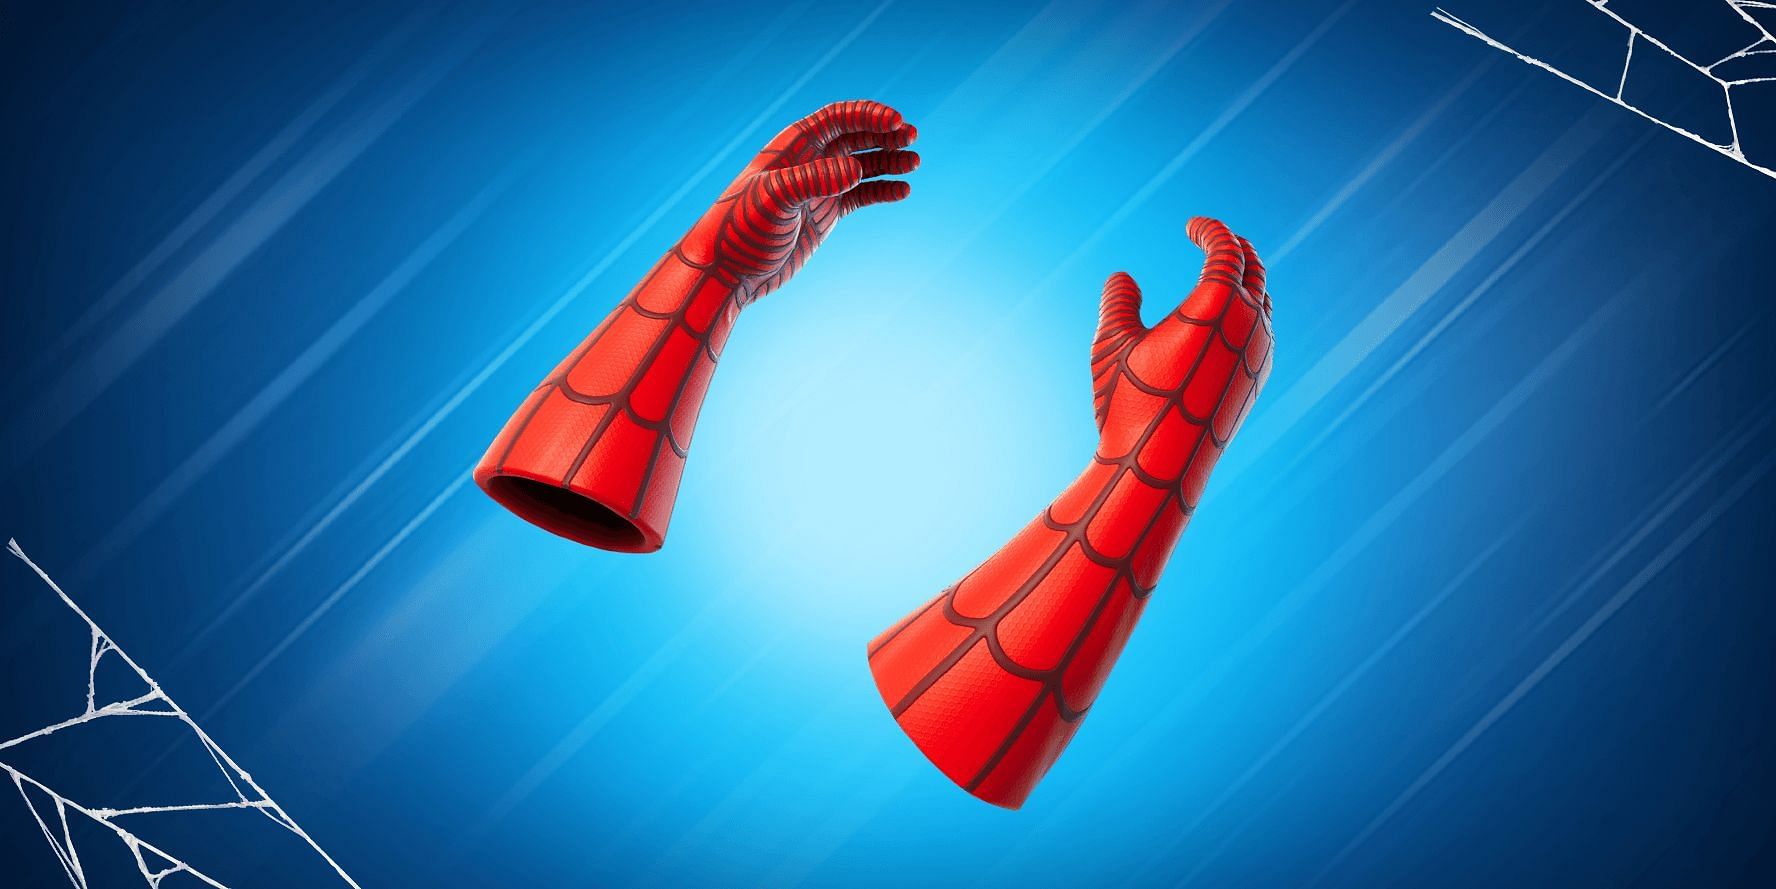 Spider-man&#039;s Web Shooters have insane potential and are causing an uproar from the Fortnite community (Image via Epic Games)